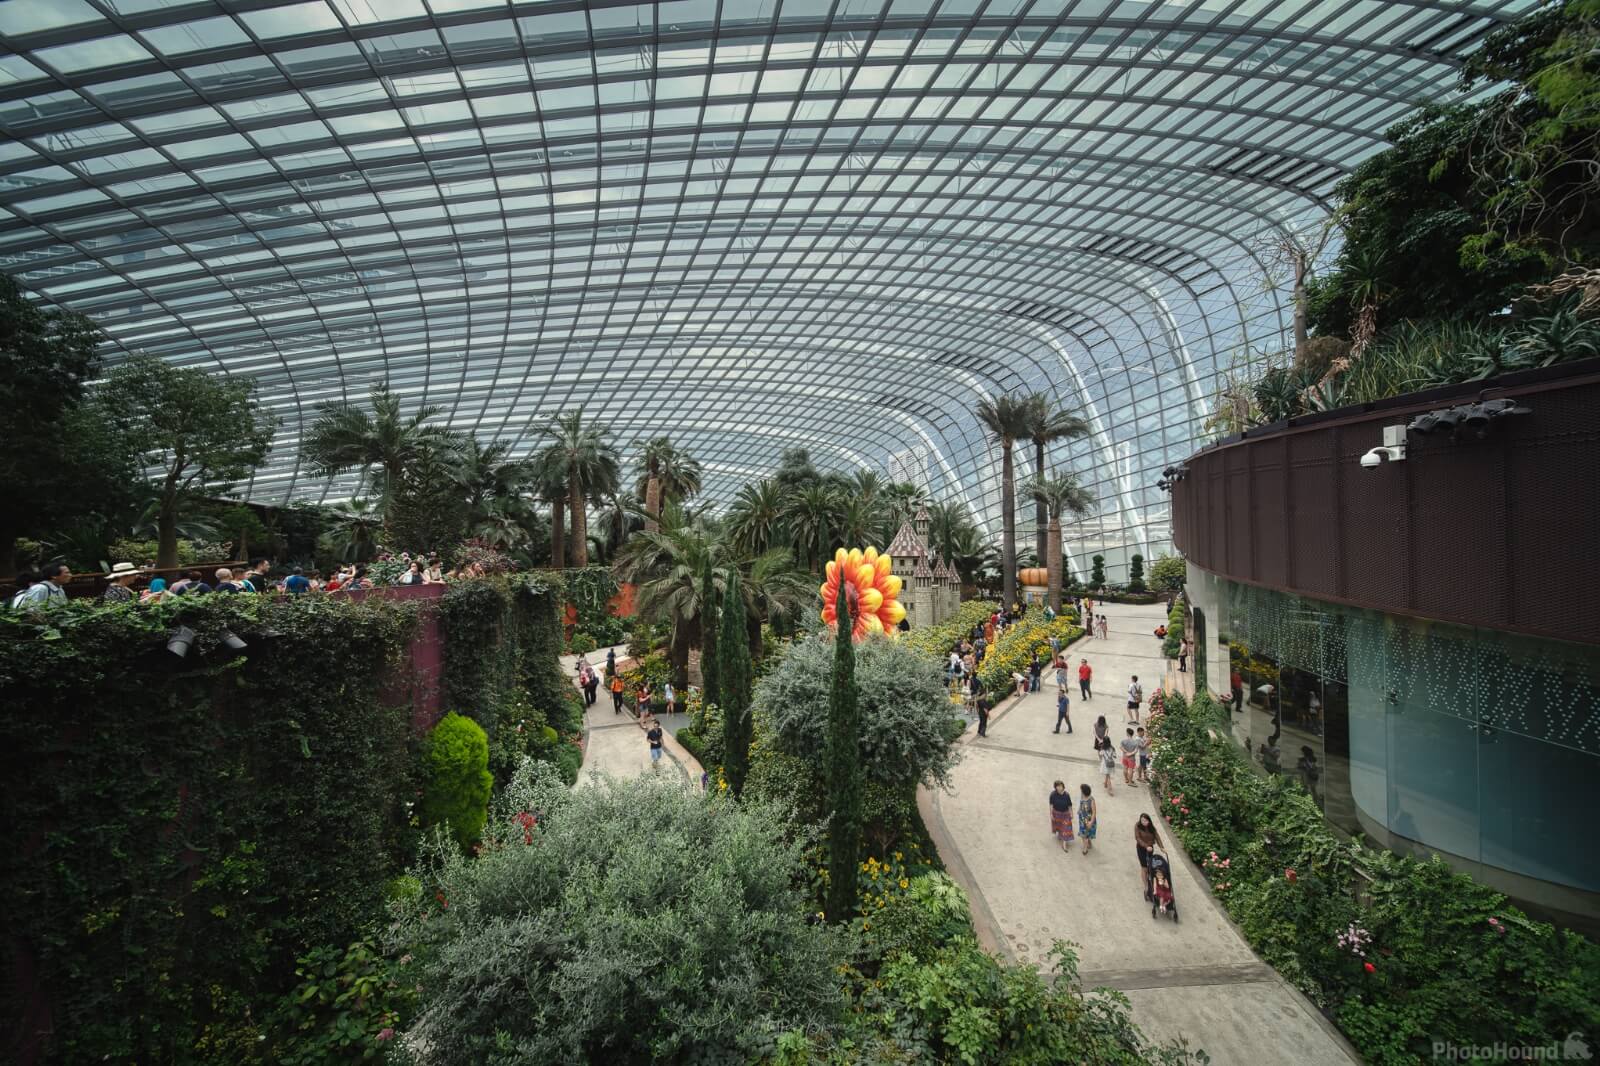 Image of Flower Dome by Mathew Browne